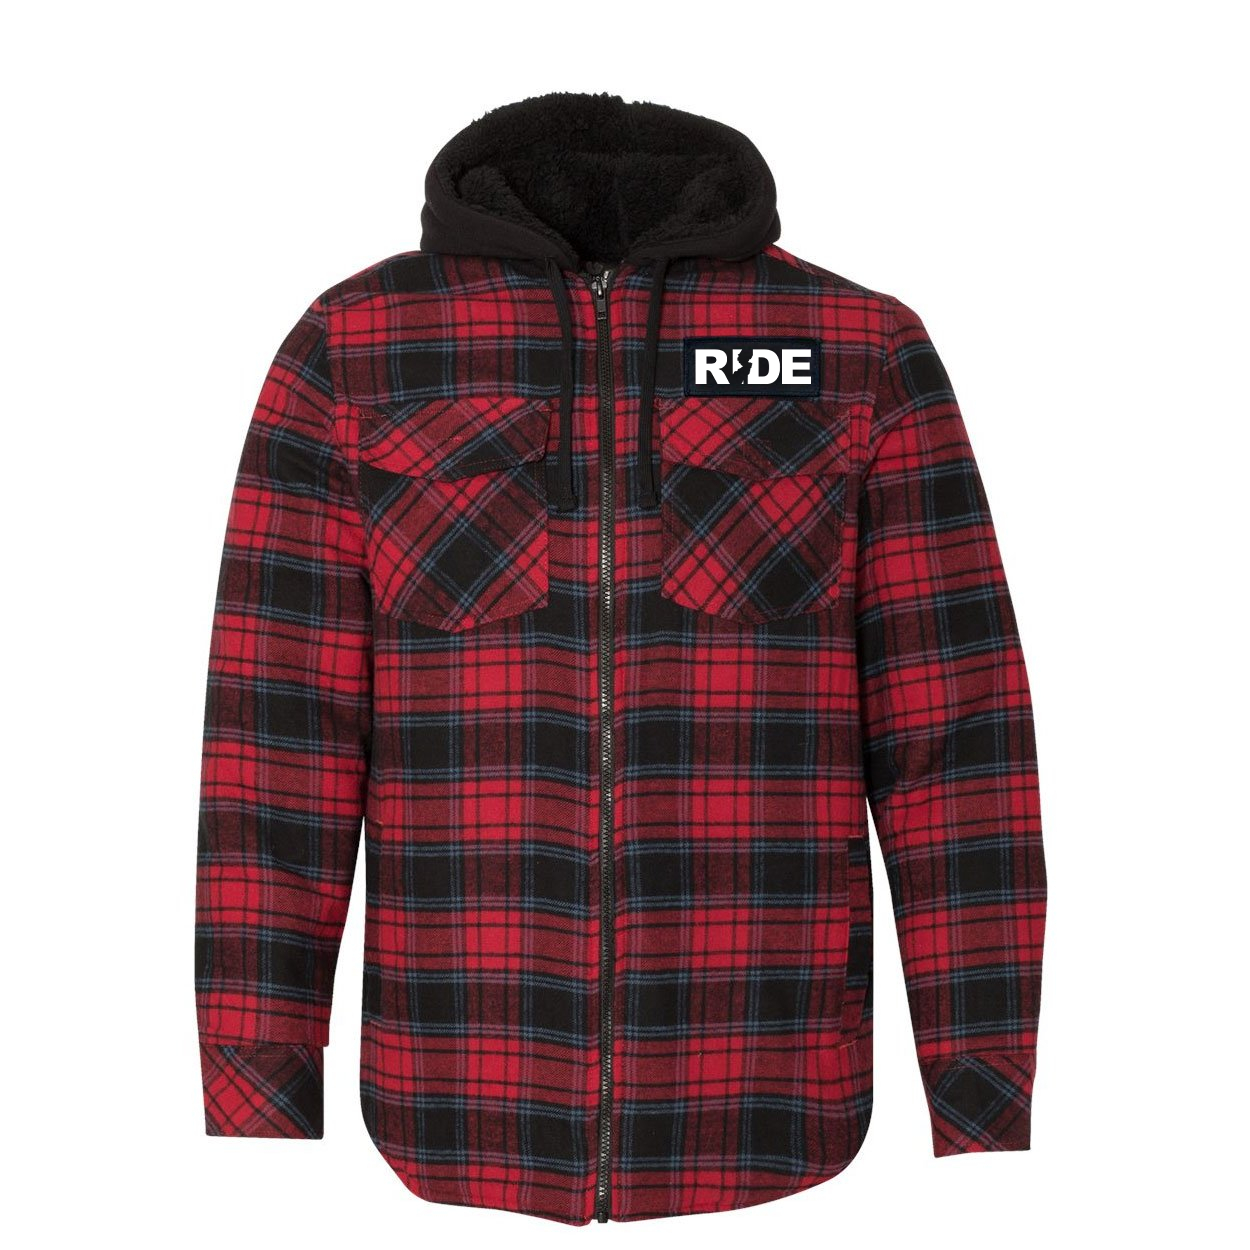 Ride New Jersey Classic Unisex Full Zip Woven Patch Hooded Flannel Jacket Red/Black Buffalo (White Logo)